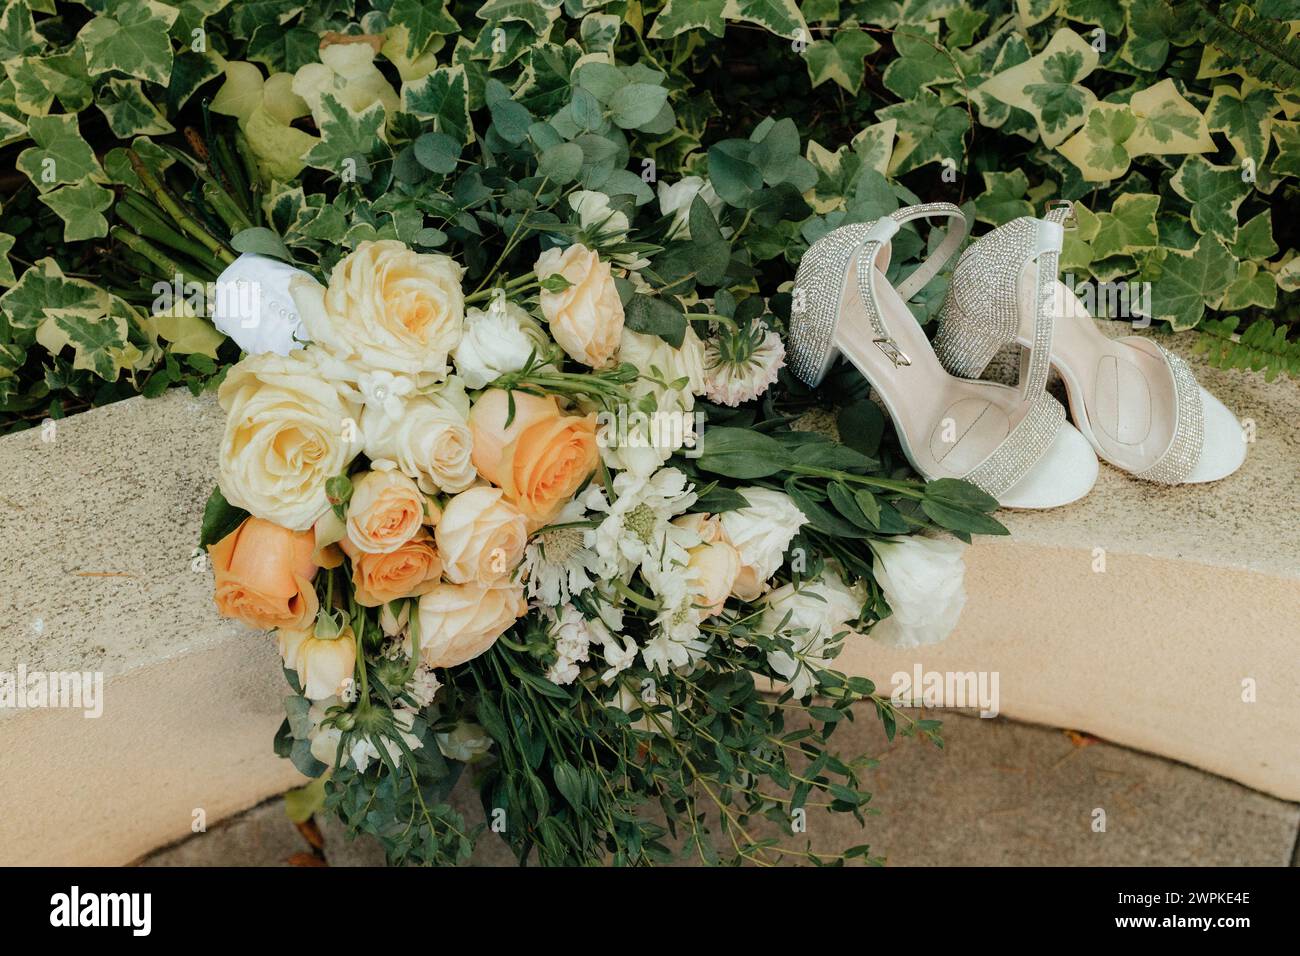 Wedding shoes and wedding florals Stock Photo